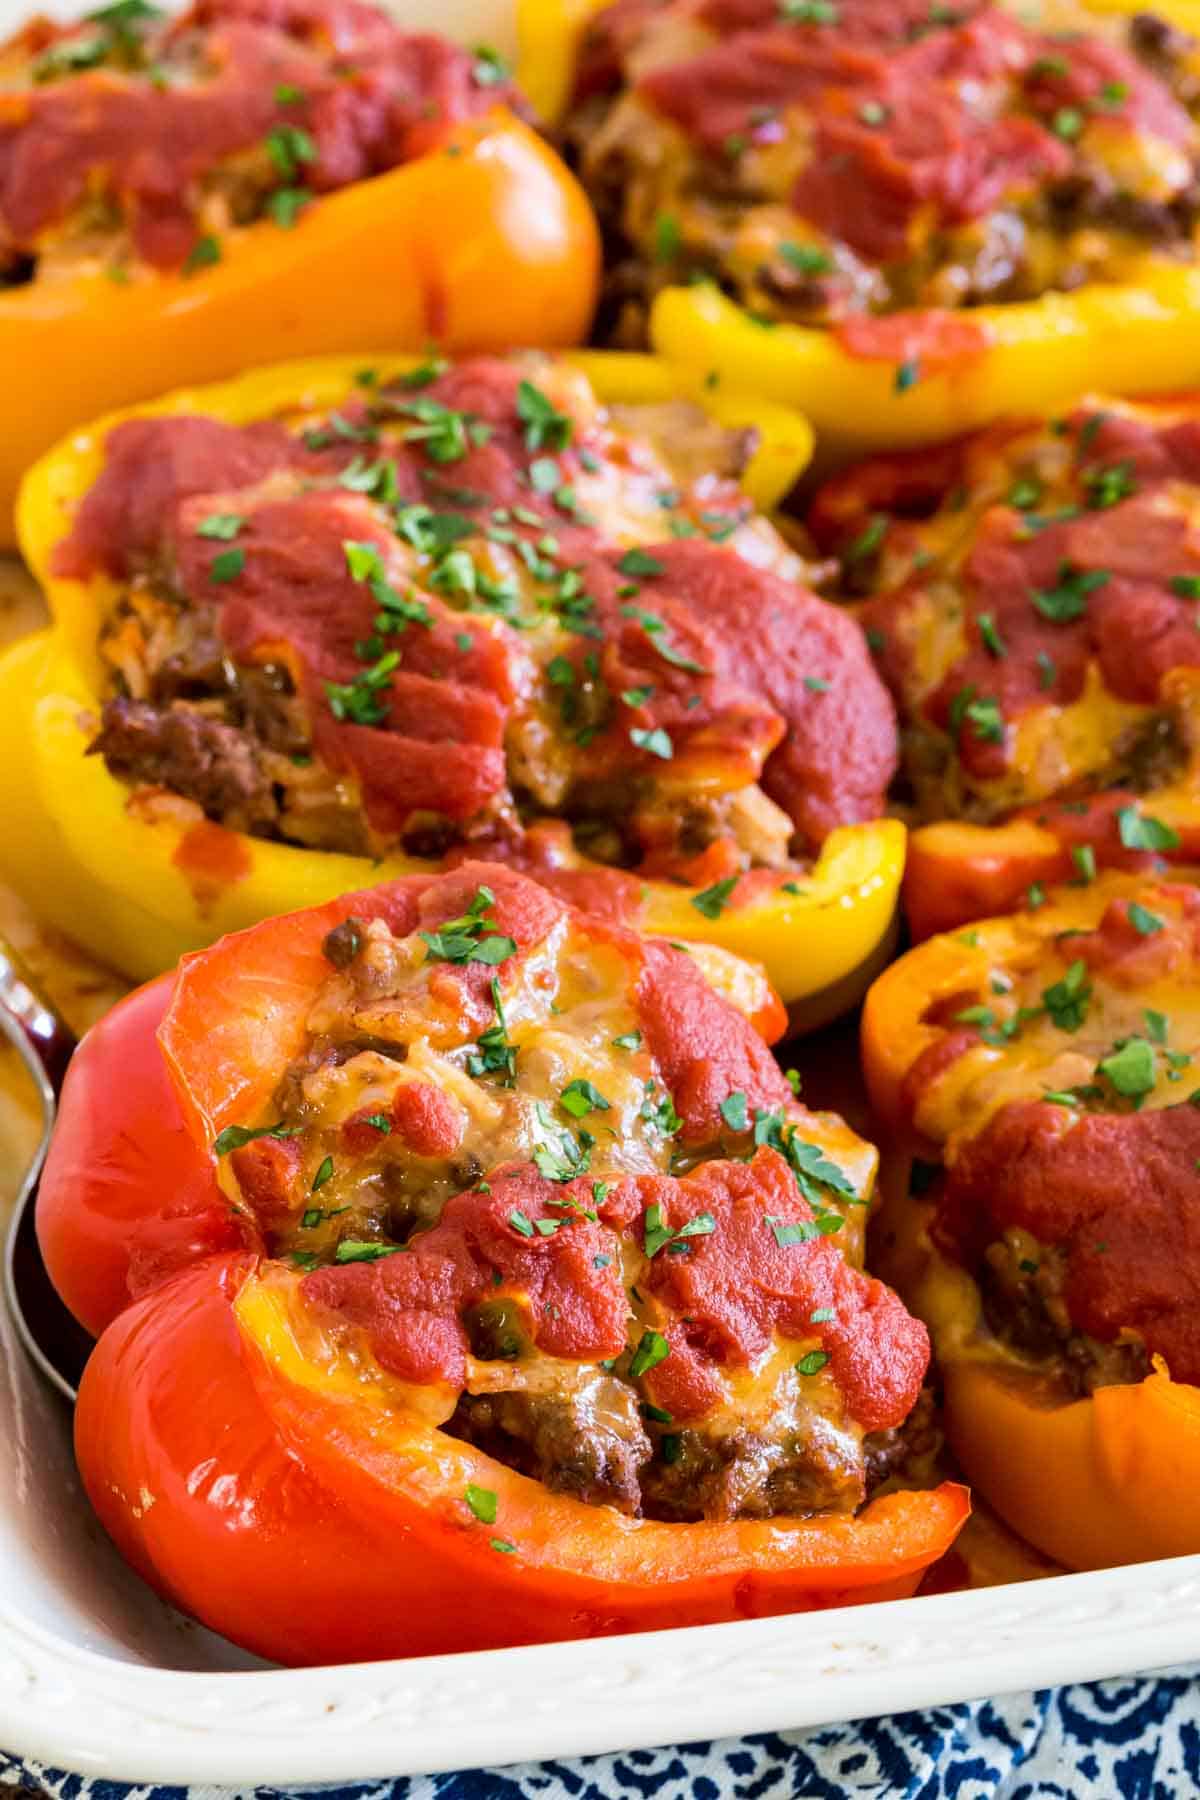 Stuffed peppers in a white ceramic baking dish.